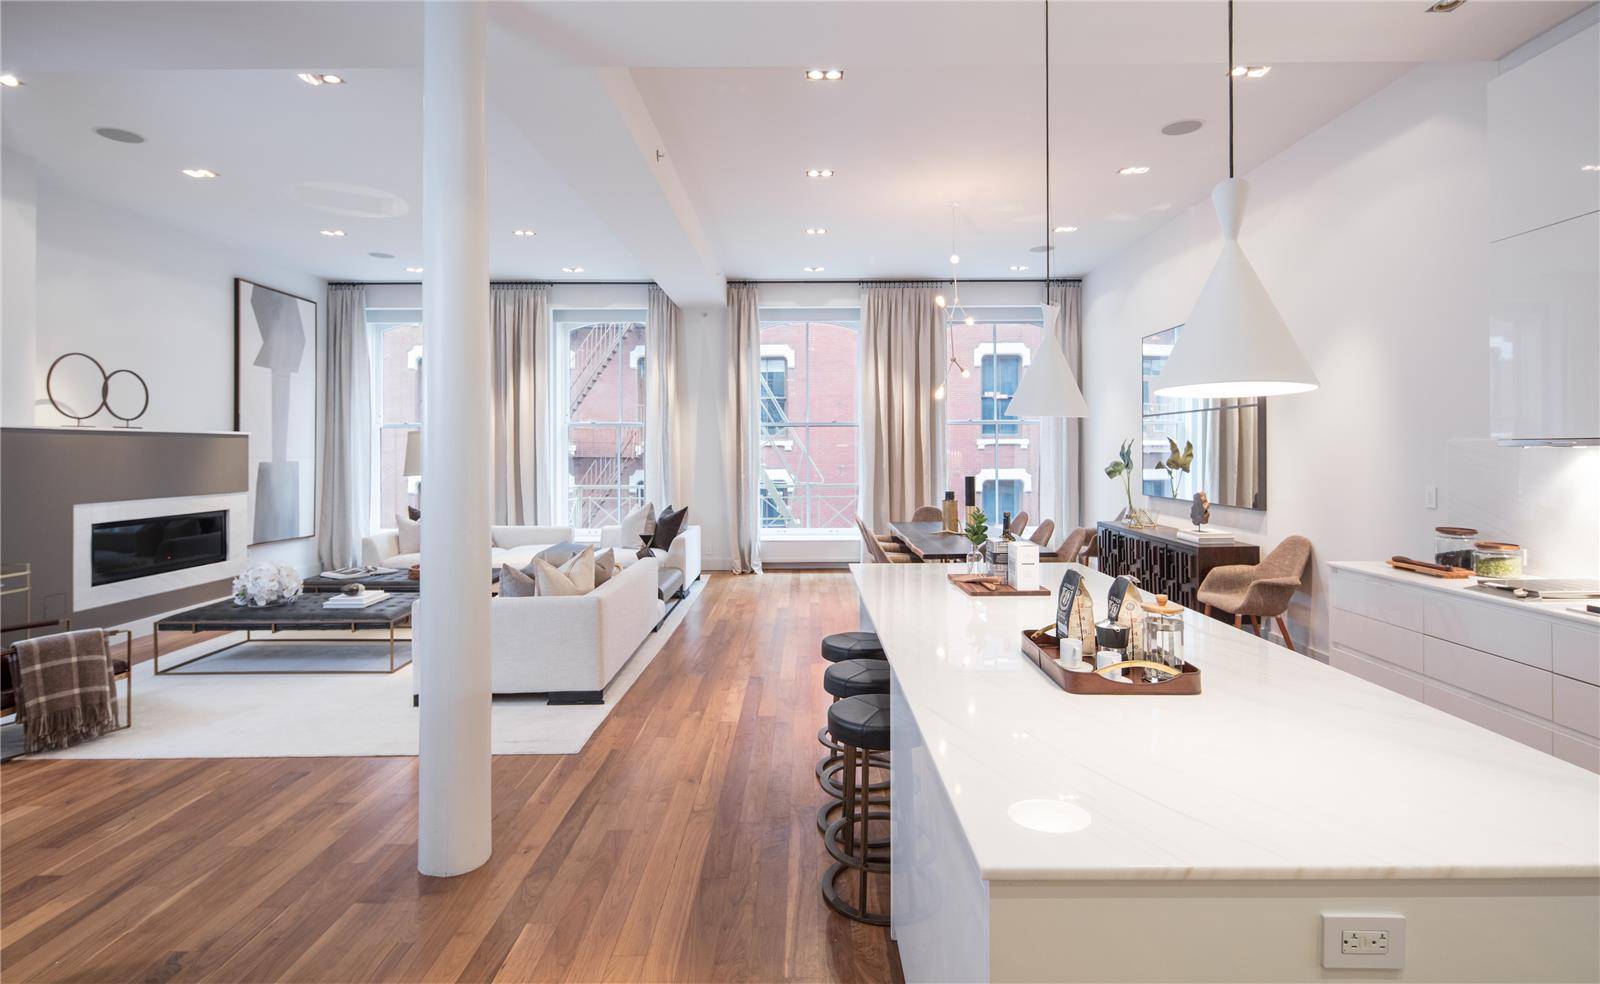 53 Greene Street is a Museum Quality Condo conversion located in SoHo's Historic Cast Iron District, offering a modern take on the traditional Loft providing state of the art living ...